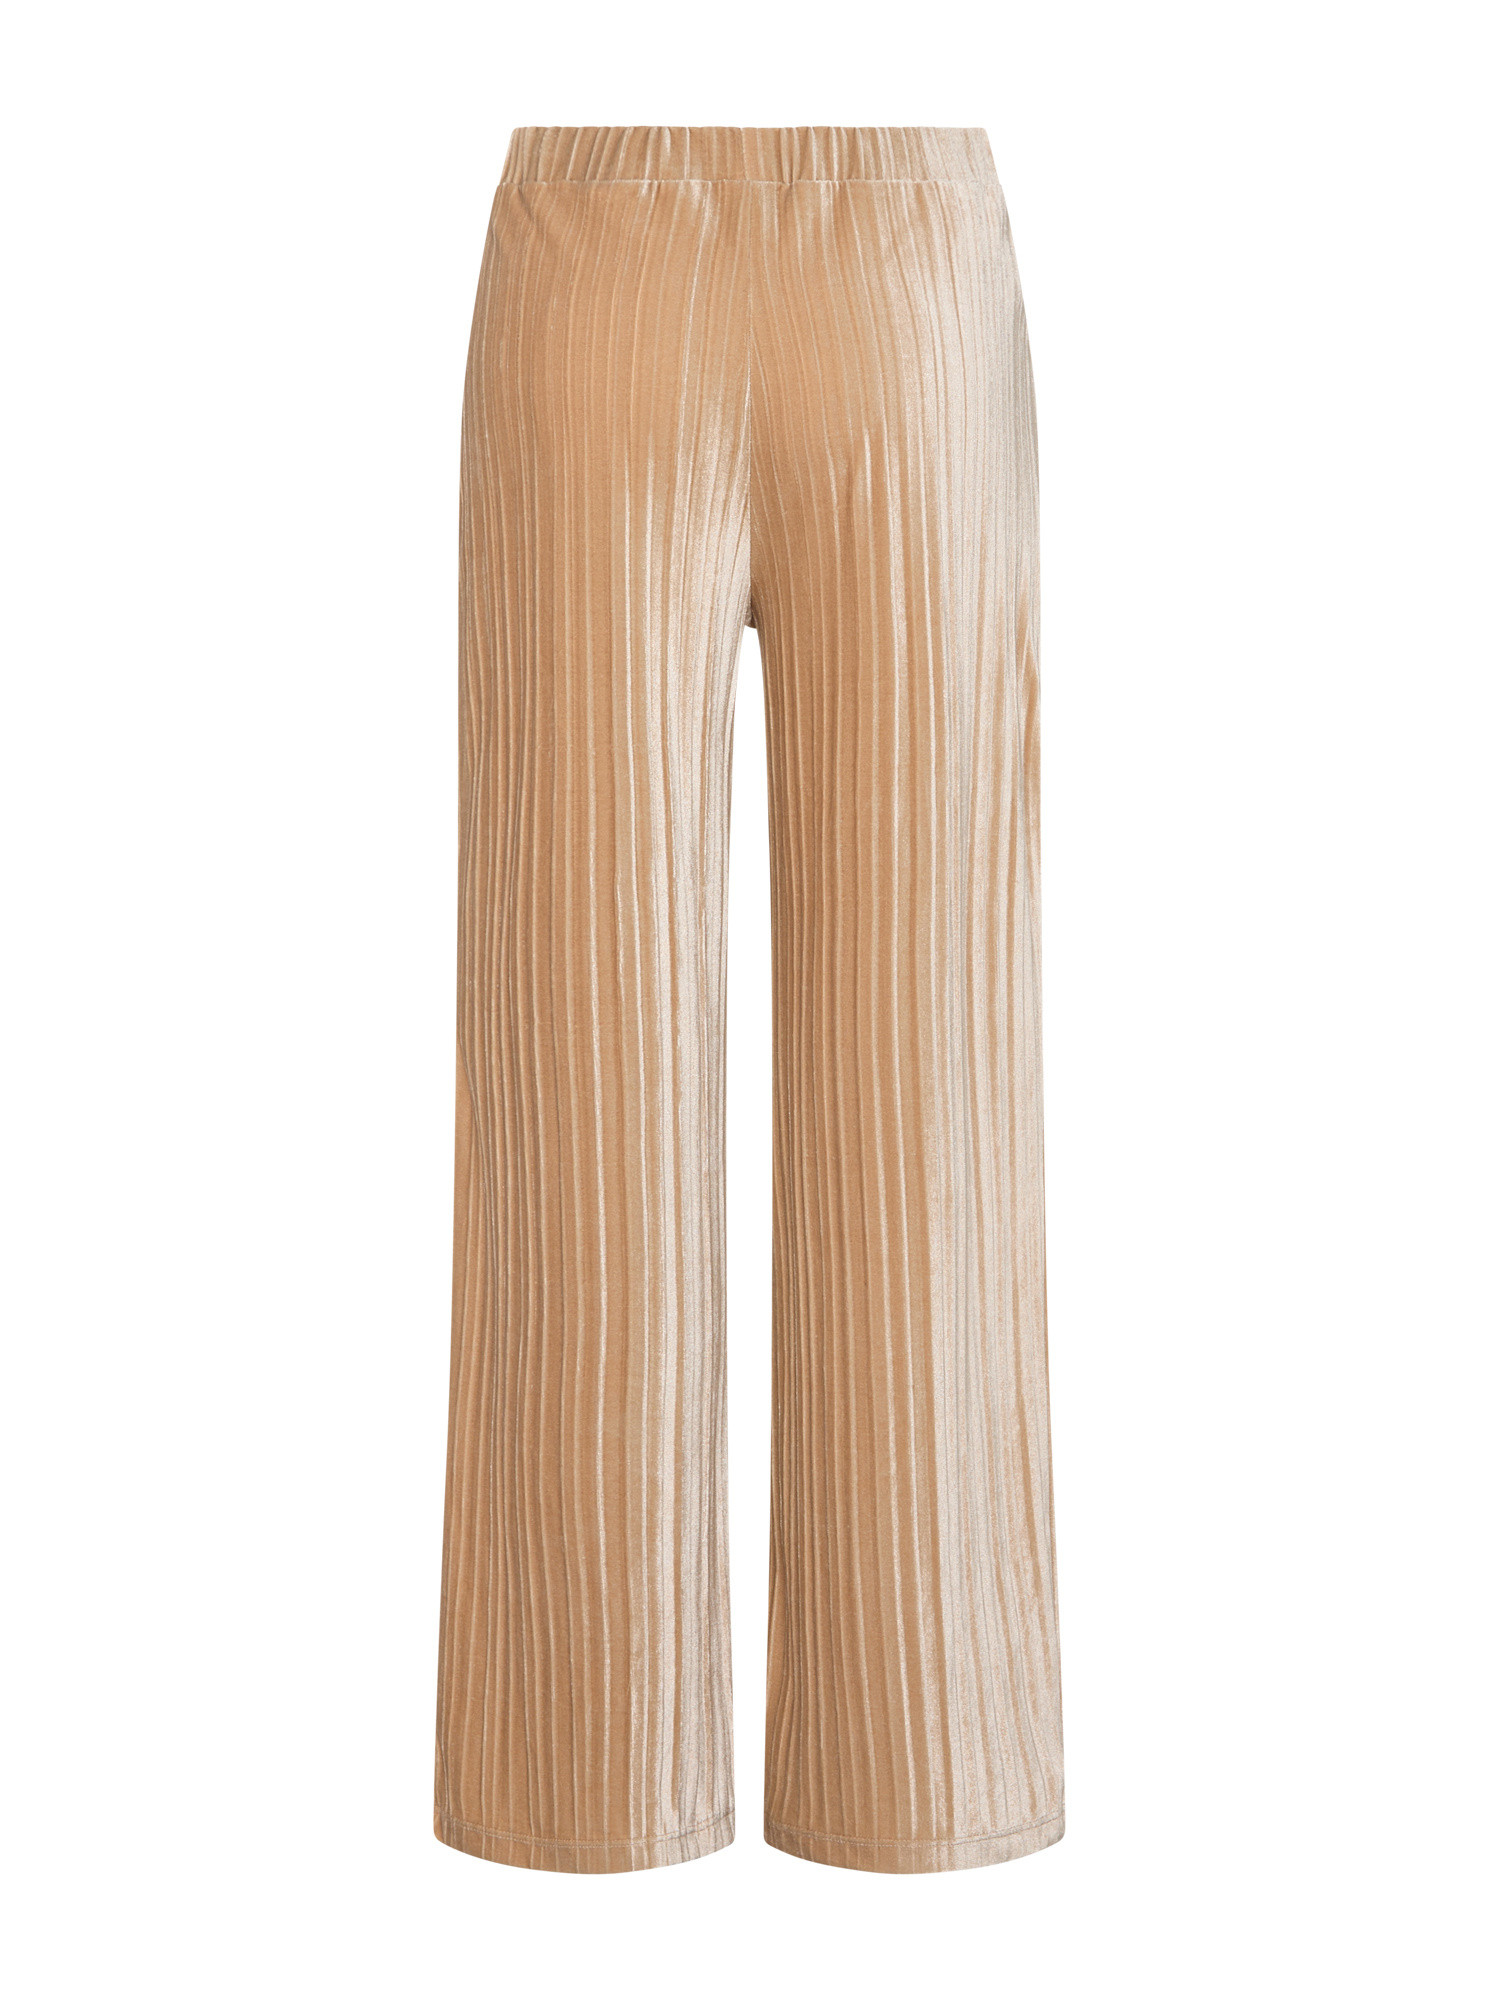 Koan - Wide leg trousers in pleated effect velvet, Champagne Yellow, large image number 1